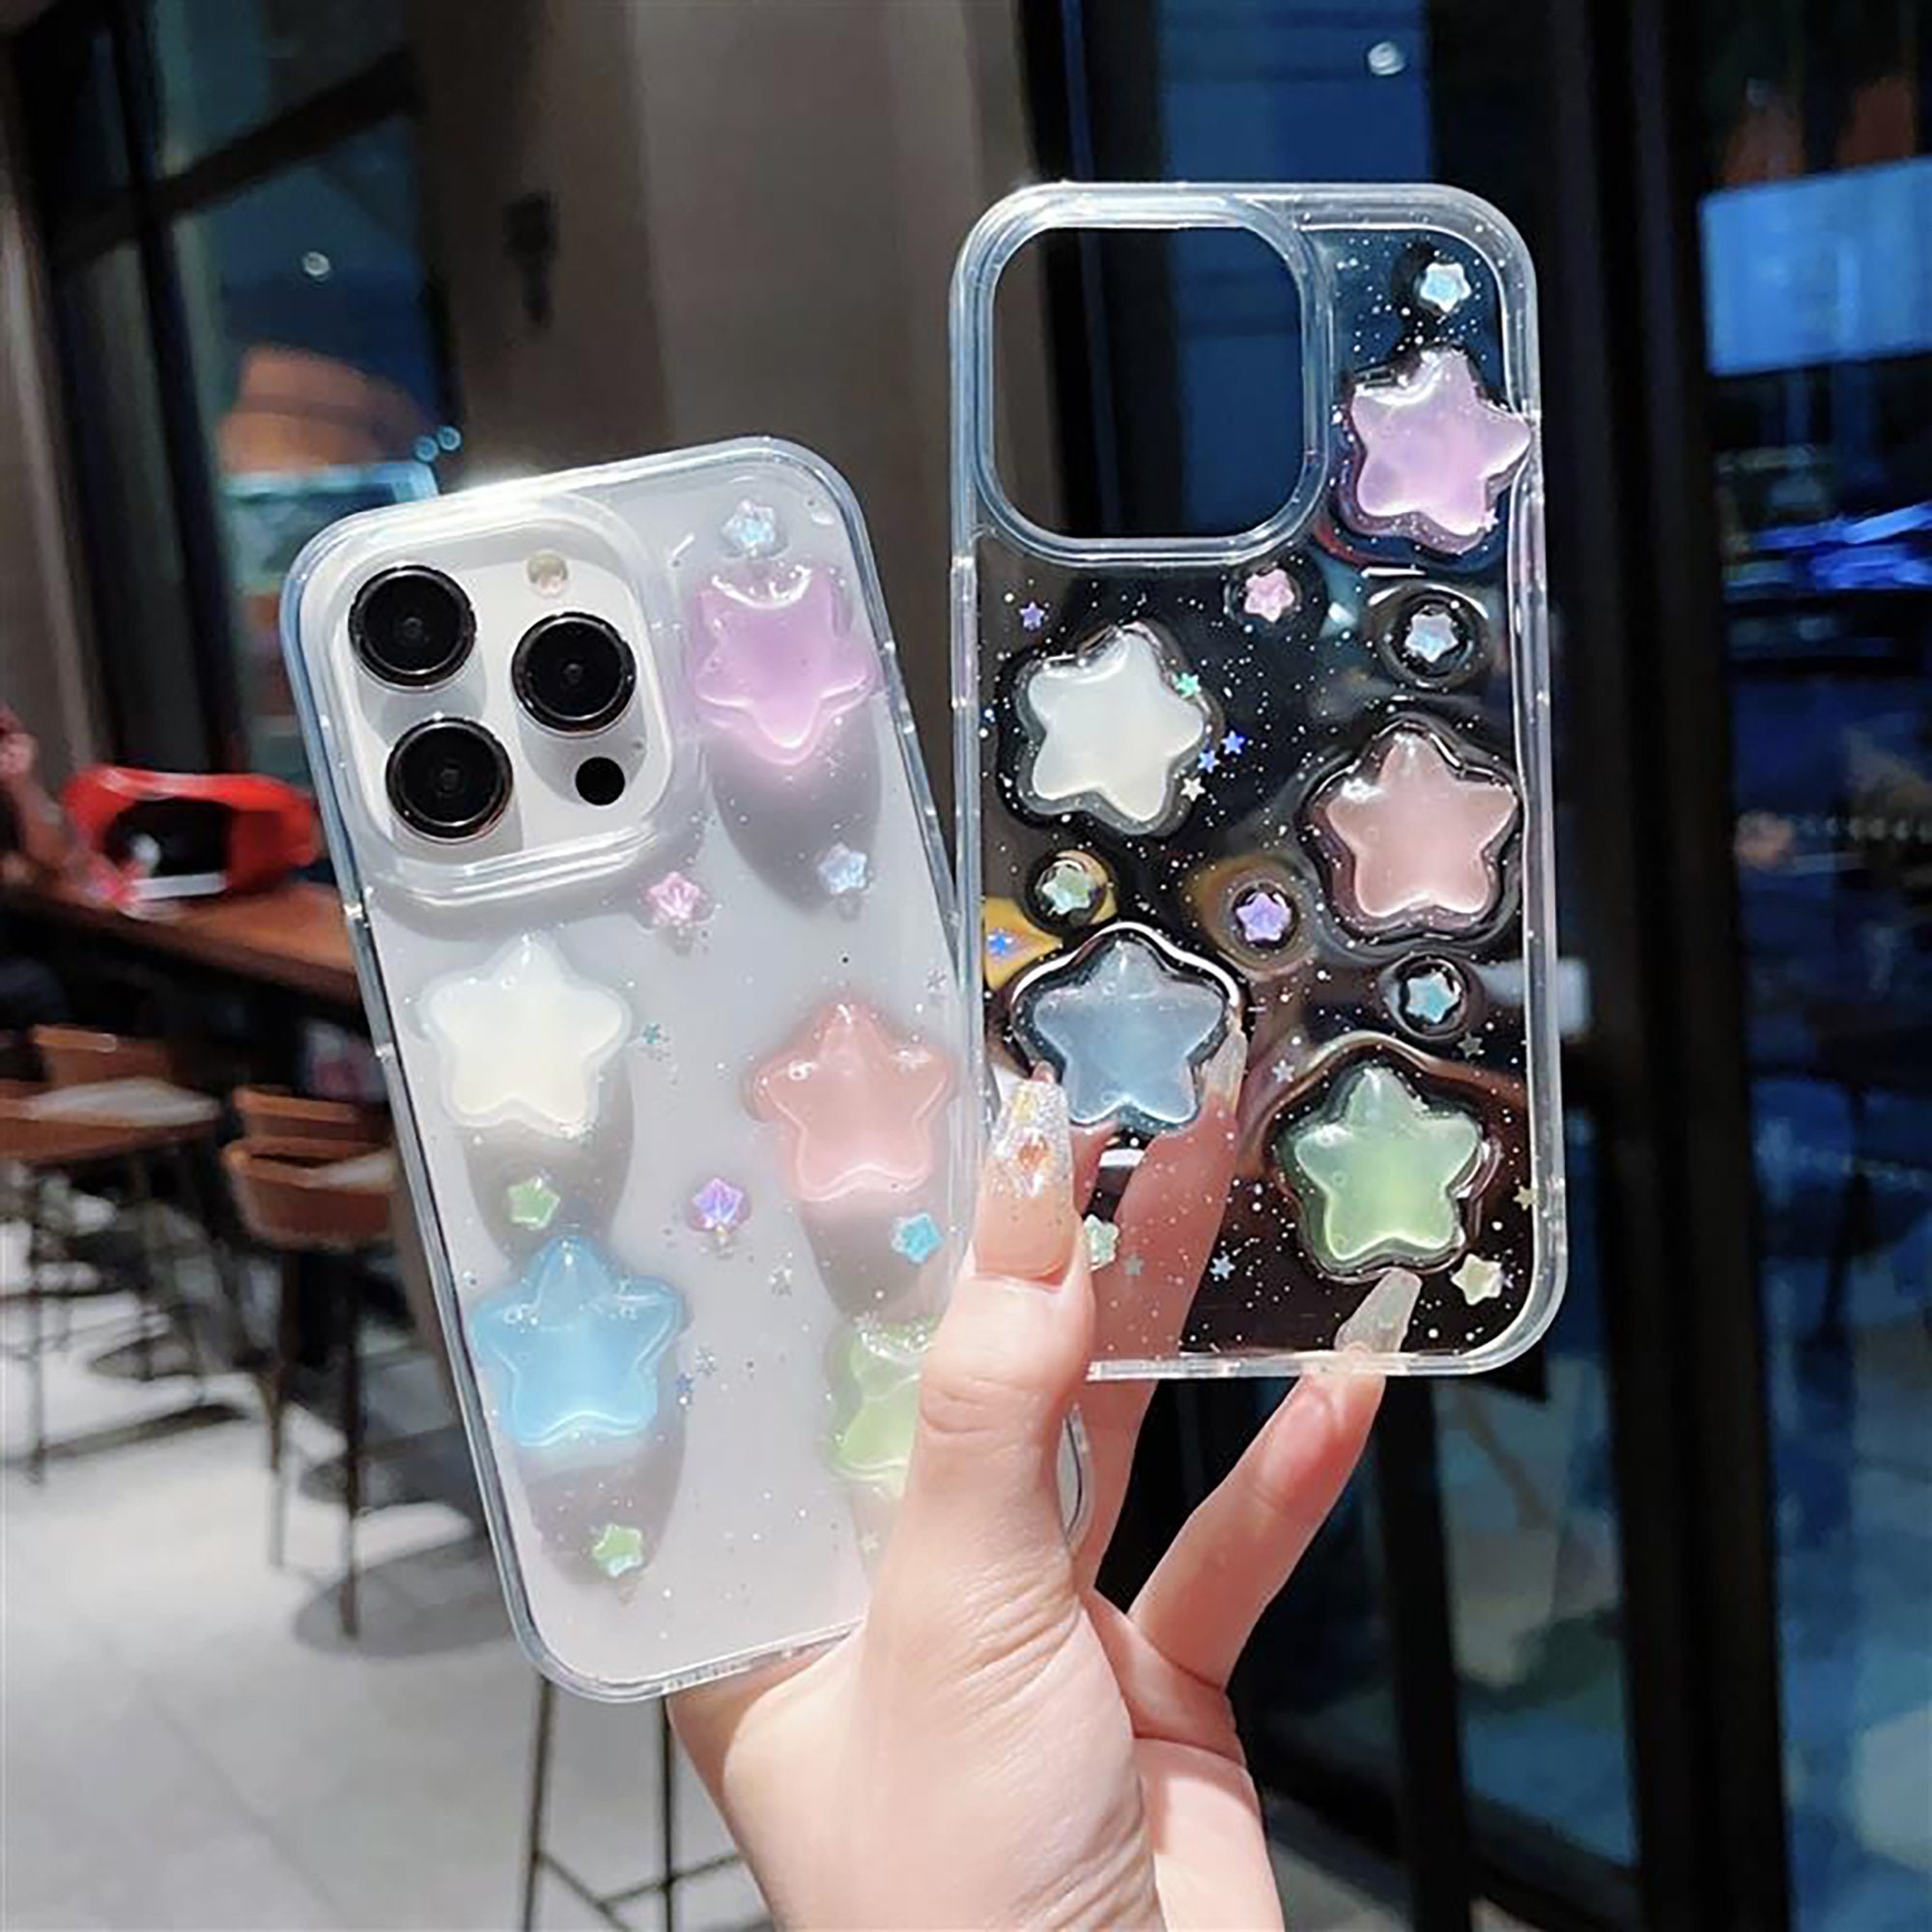 Kawaii Phone Cases Apply To Iphone 12 Pro Max,cute Cartoon Pink Pig Phone  Case Unique Fun Cover Case 3d Iphone 12 Pro Max Case Soft Silicone Shockproo